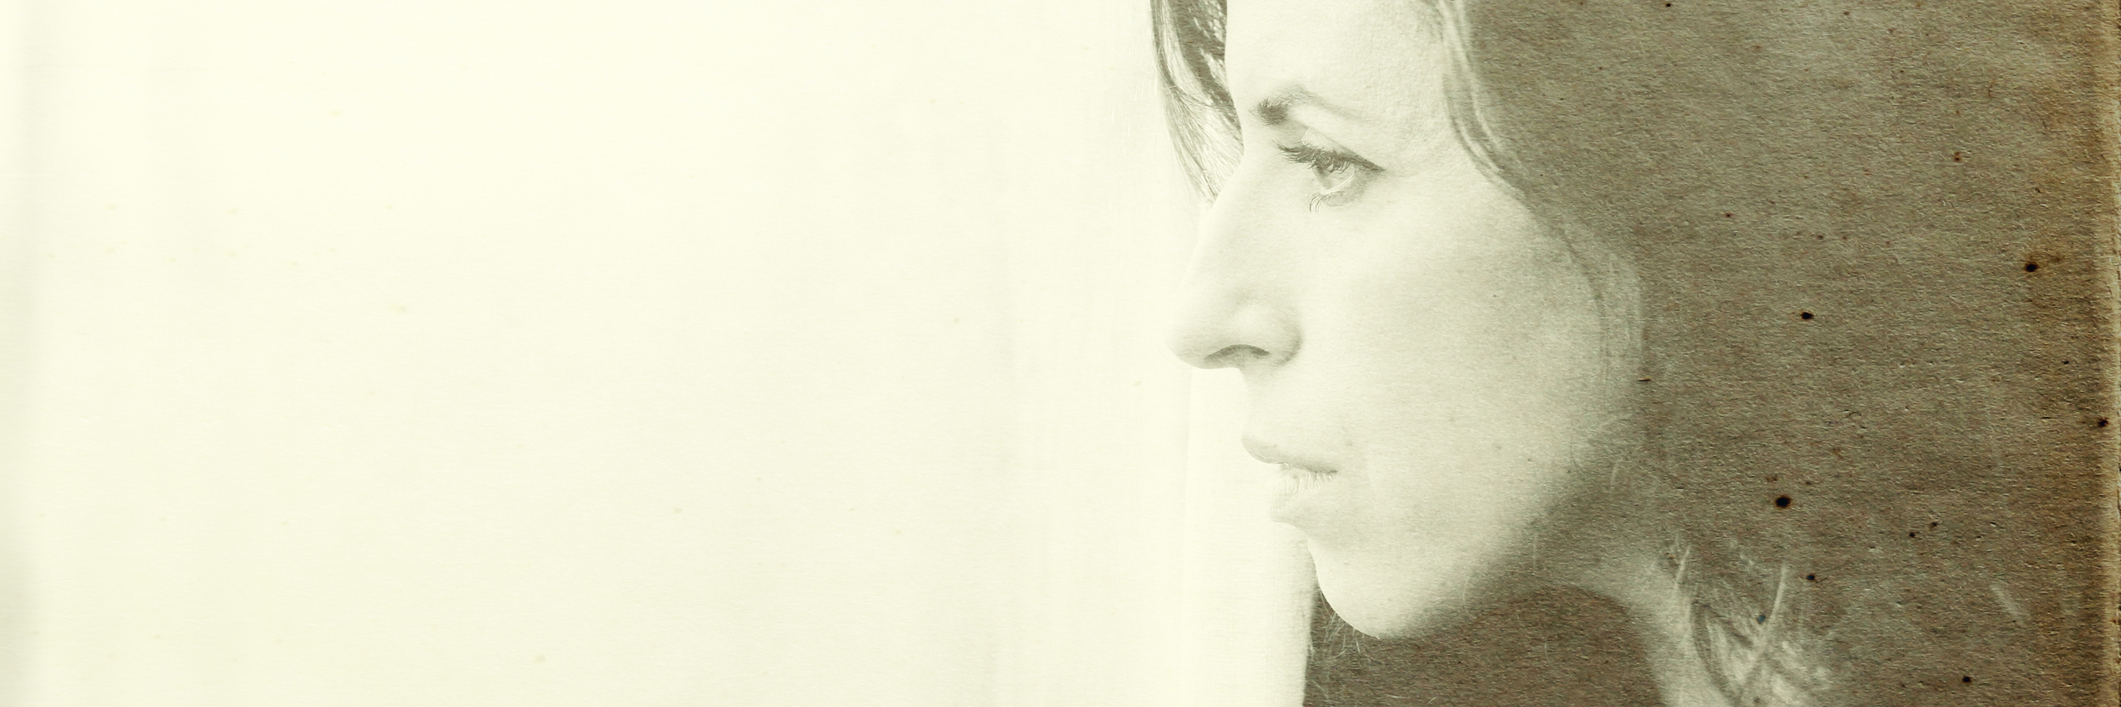 side view of woman looking out of window under sepia filter